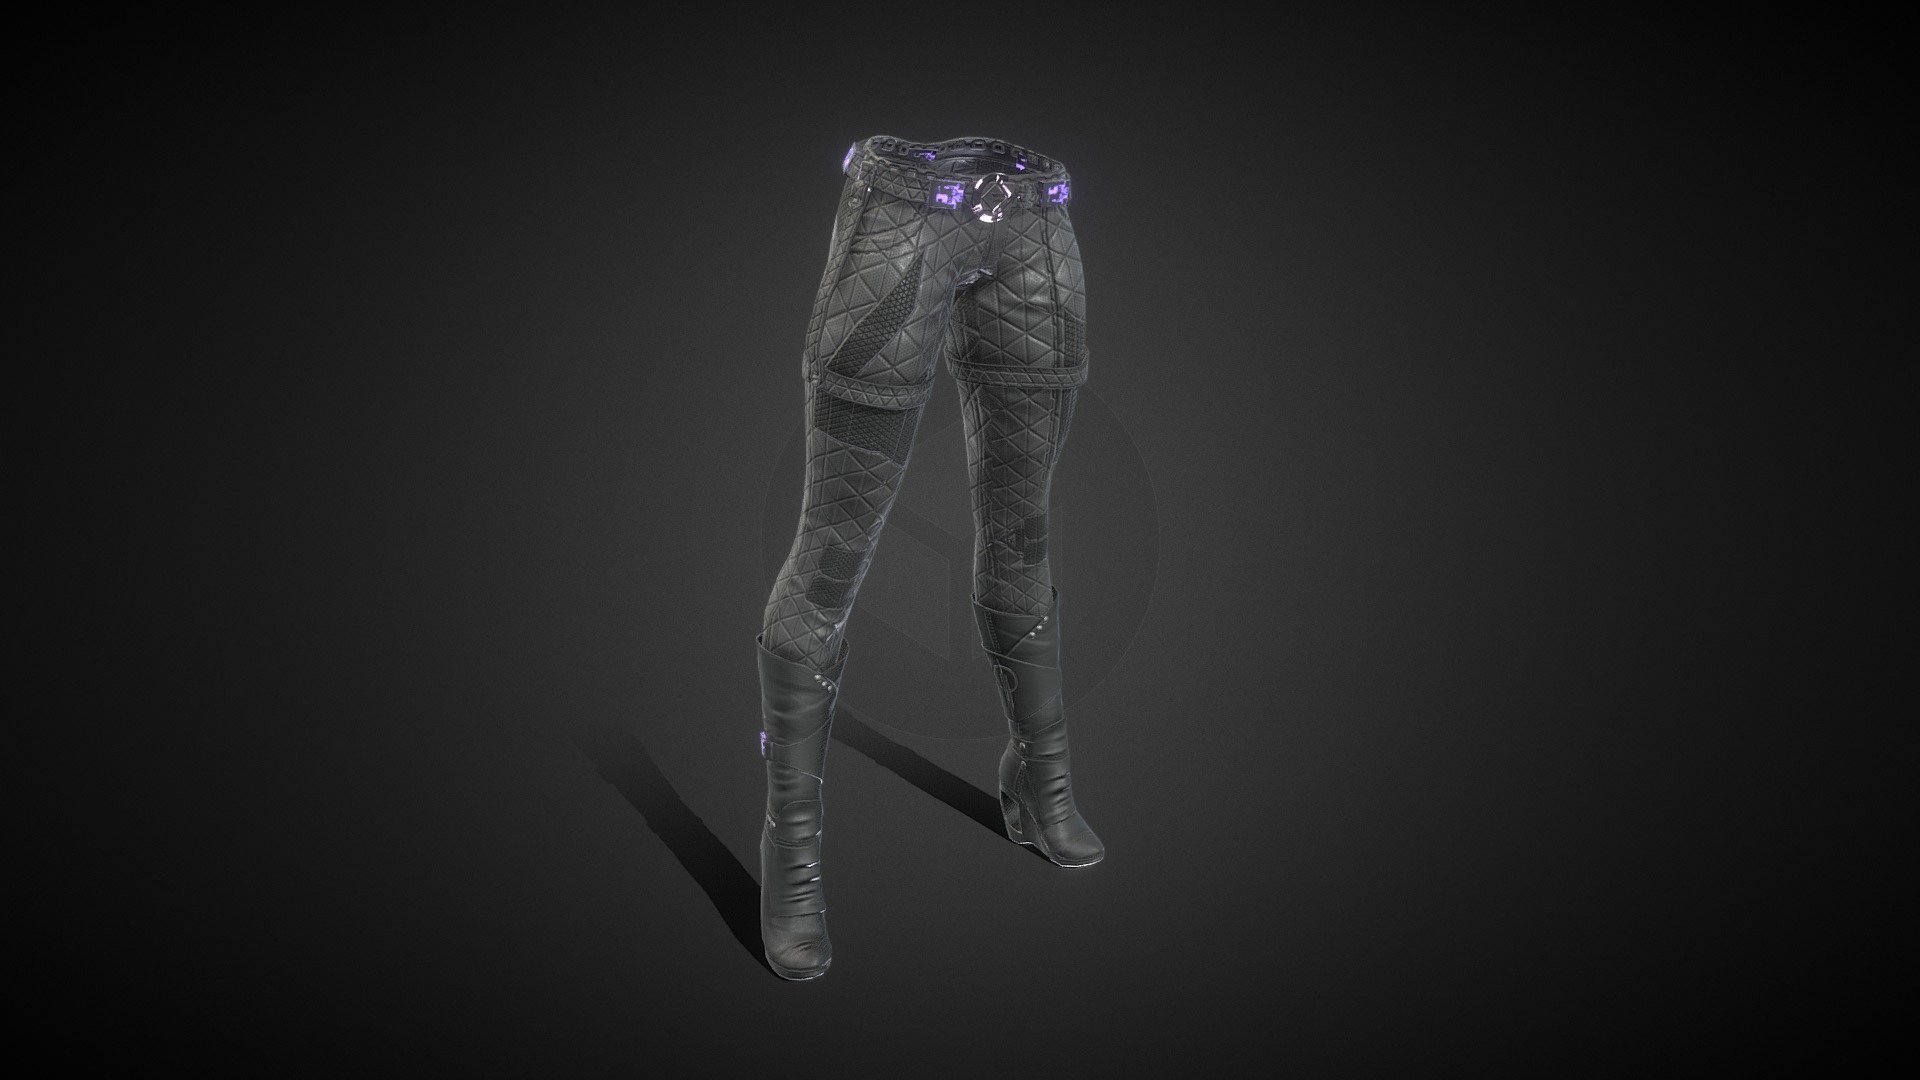 Pants -  4K PBR (Color, Height, Metallic, Roughness, Normals)
Belts - 4K PBR (Color, Height, Metallic, Roughness, Normals)
Boots - 4K PBR (Color, Height, Metallic, Roughness, Normals)
Buckles 2K PBR (Color, Metallic, Roughness, Normals, Emission)
Belt symbol 1K PBR (Color, Metallic, Roughness, Normals, Emission)
Tileable roughness 1K map for rivets - Female Leather Pants & Boots - Buy Royalty Free 3D model by dejan31 3d model